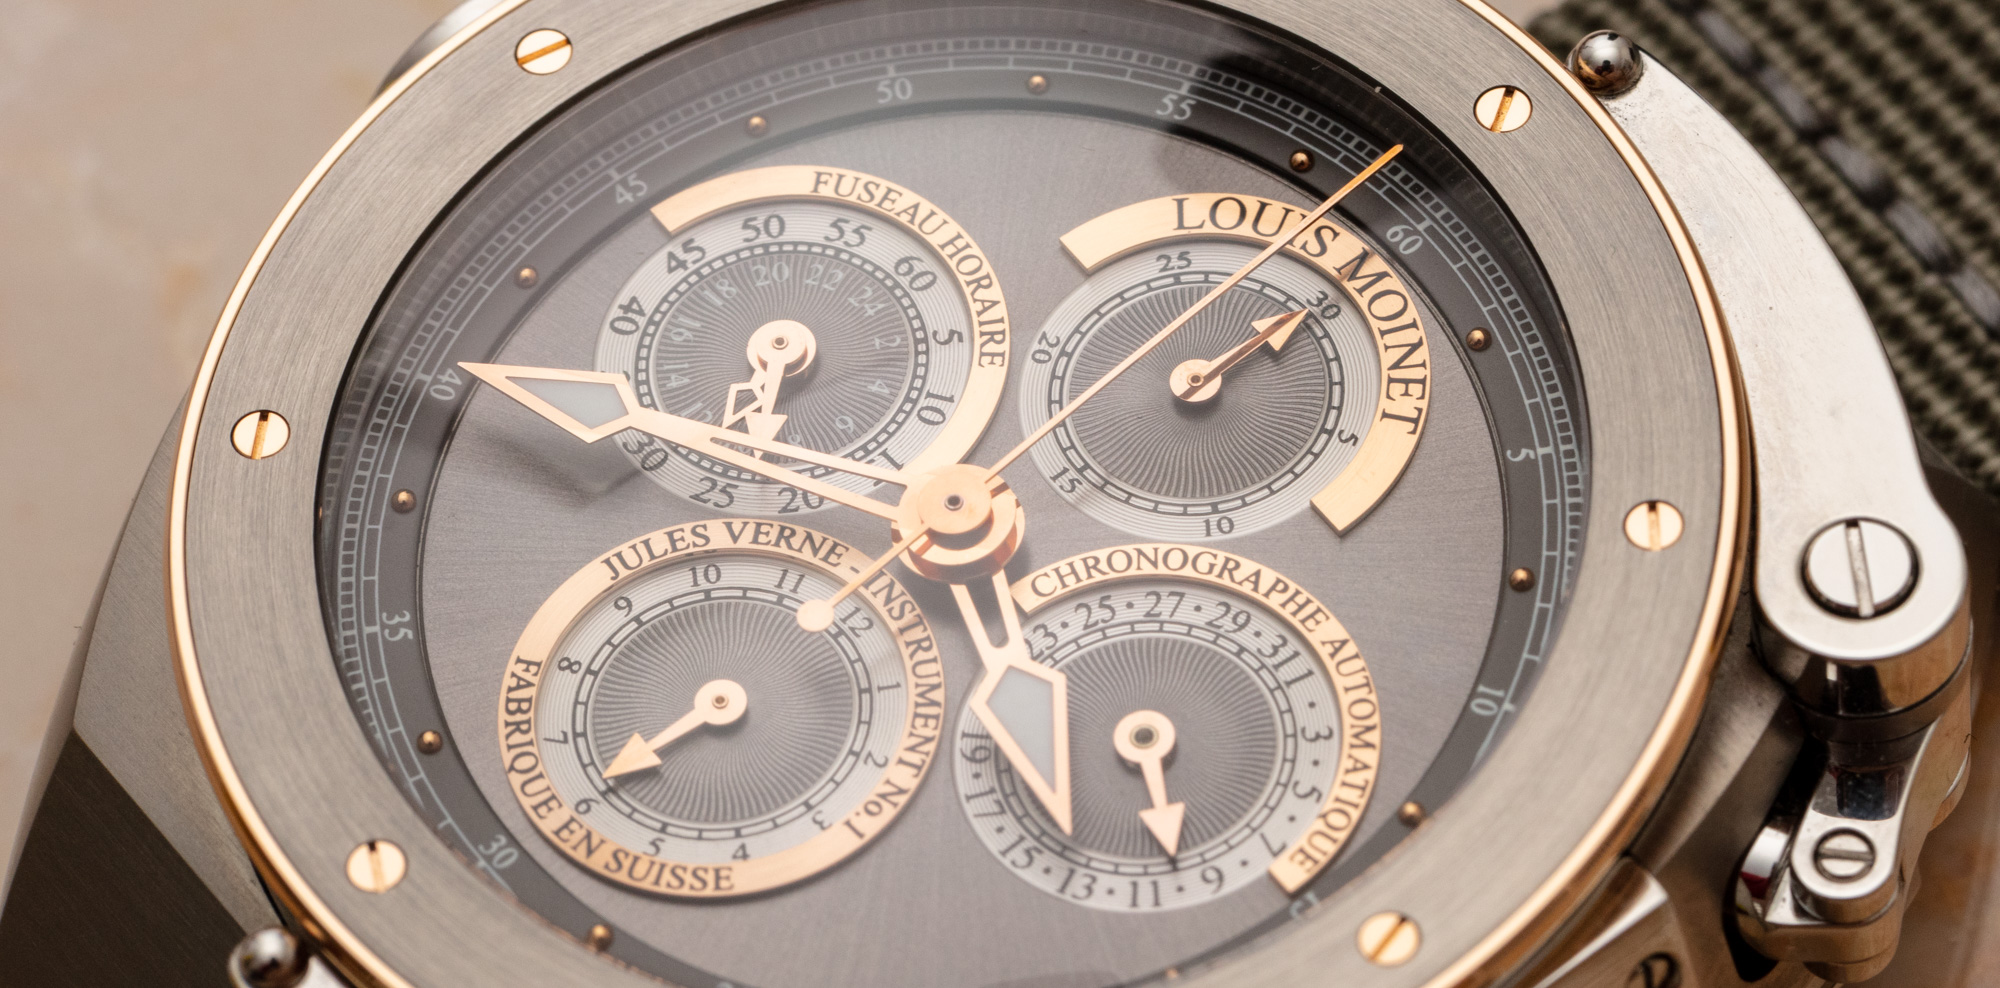 Louis Moinet Jules Vernes Tourbillon “To The Moon” – The Watch Pages